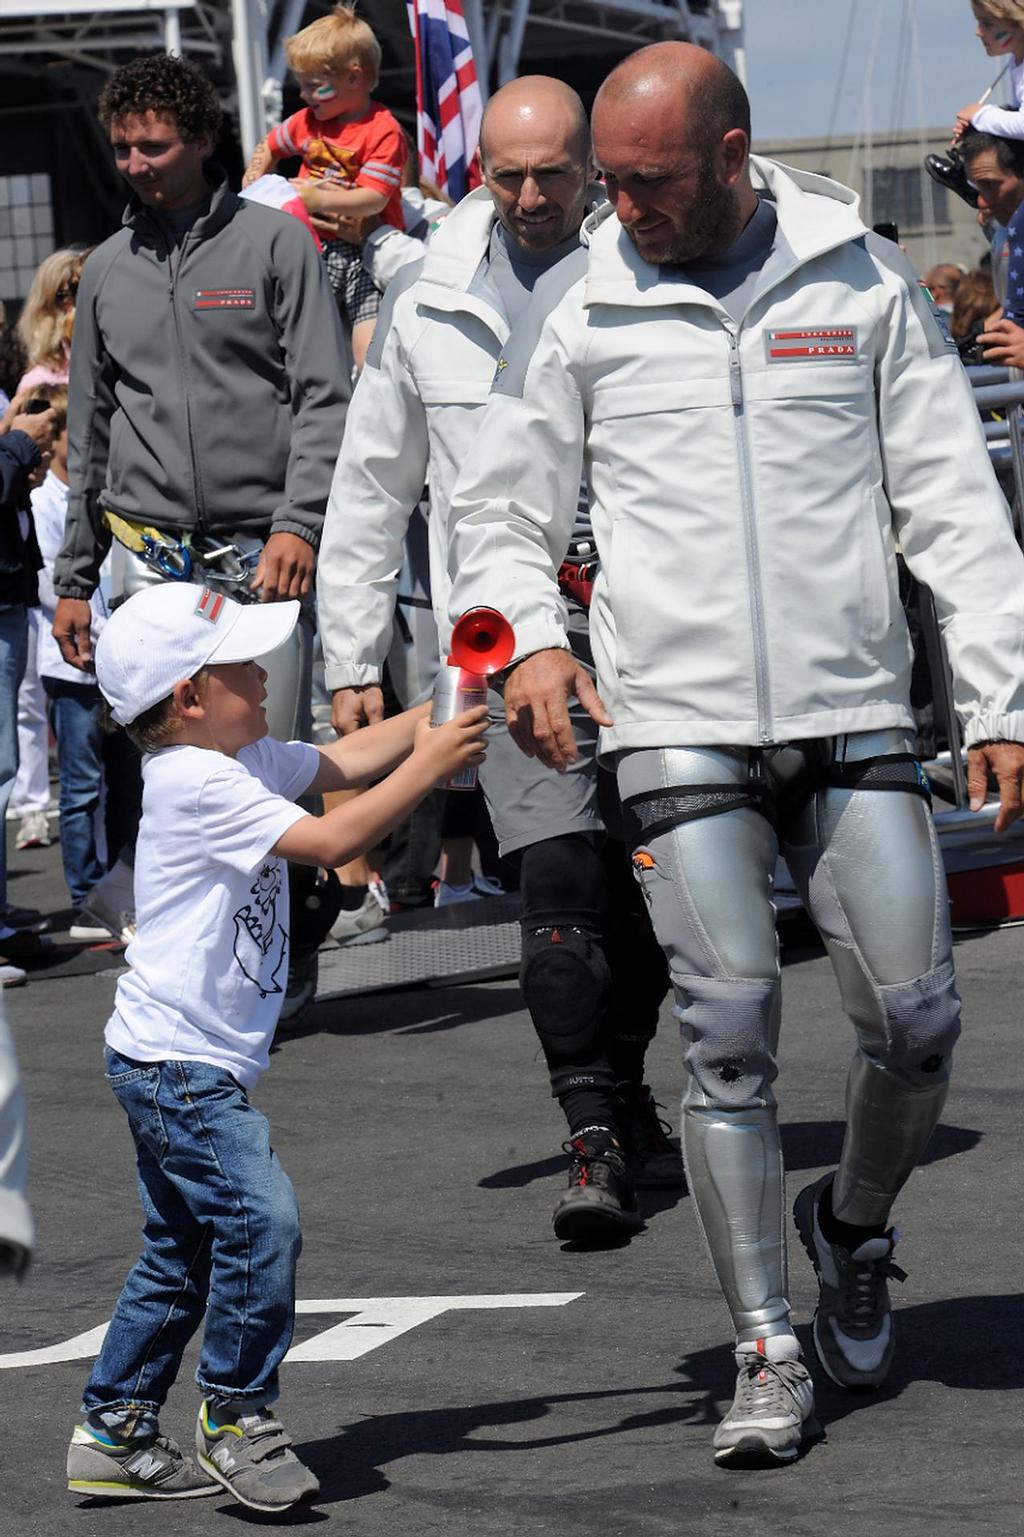 Max Sirena’s son Lorenzo, 4, wants to give his Dad a horn before he goes out to sail on August 21, 2013 at the Louis Vuitton Cup in San Francisco California. ©  SW